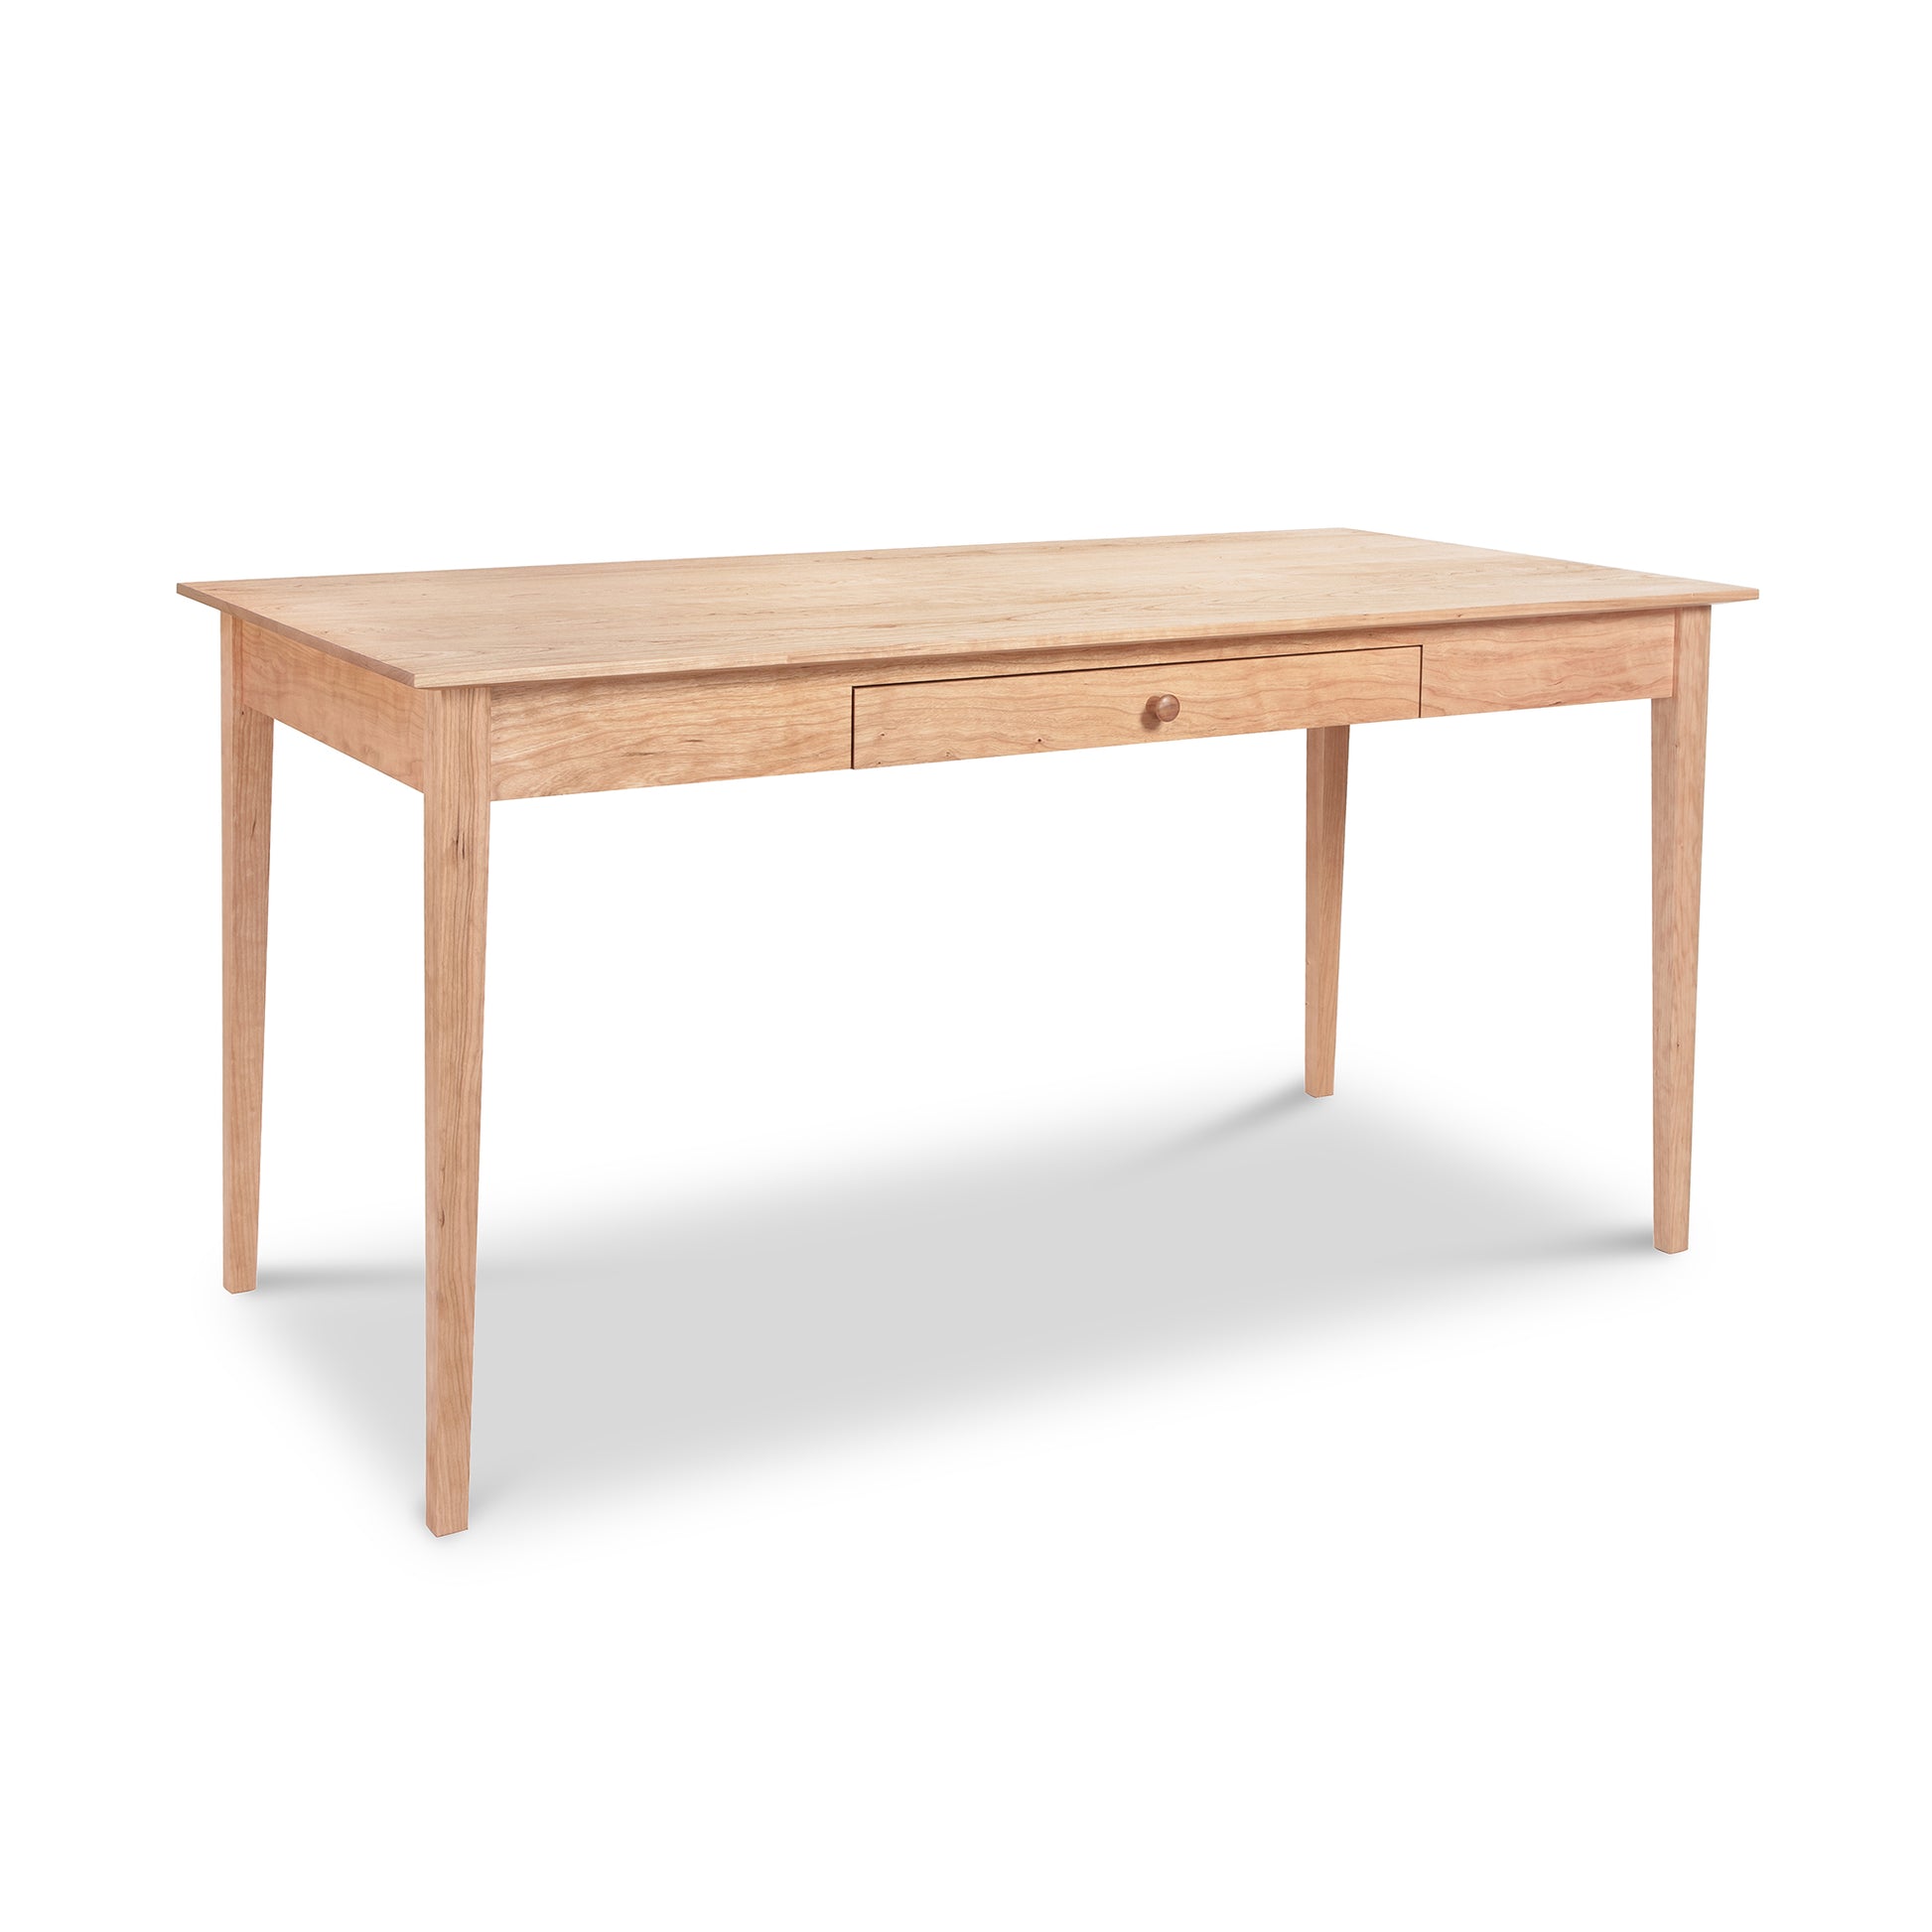 An American Shaker Writing Desk by Maple Corner Woodworks, crafted from sustainably harvested hardwood, with a single centered drawer, standing on four straight legs, against a white background.